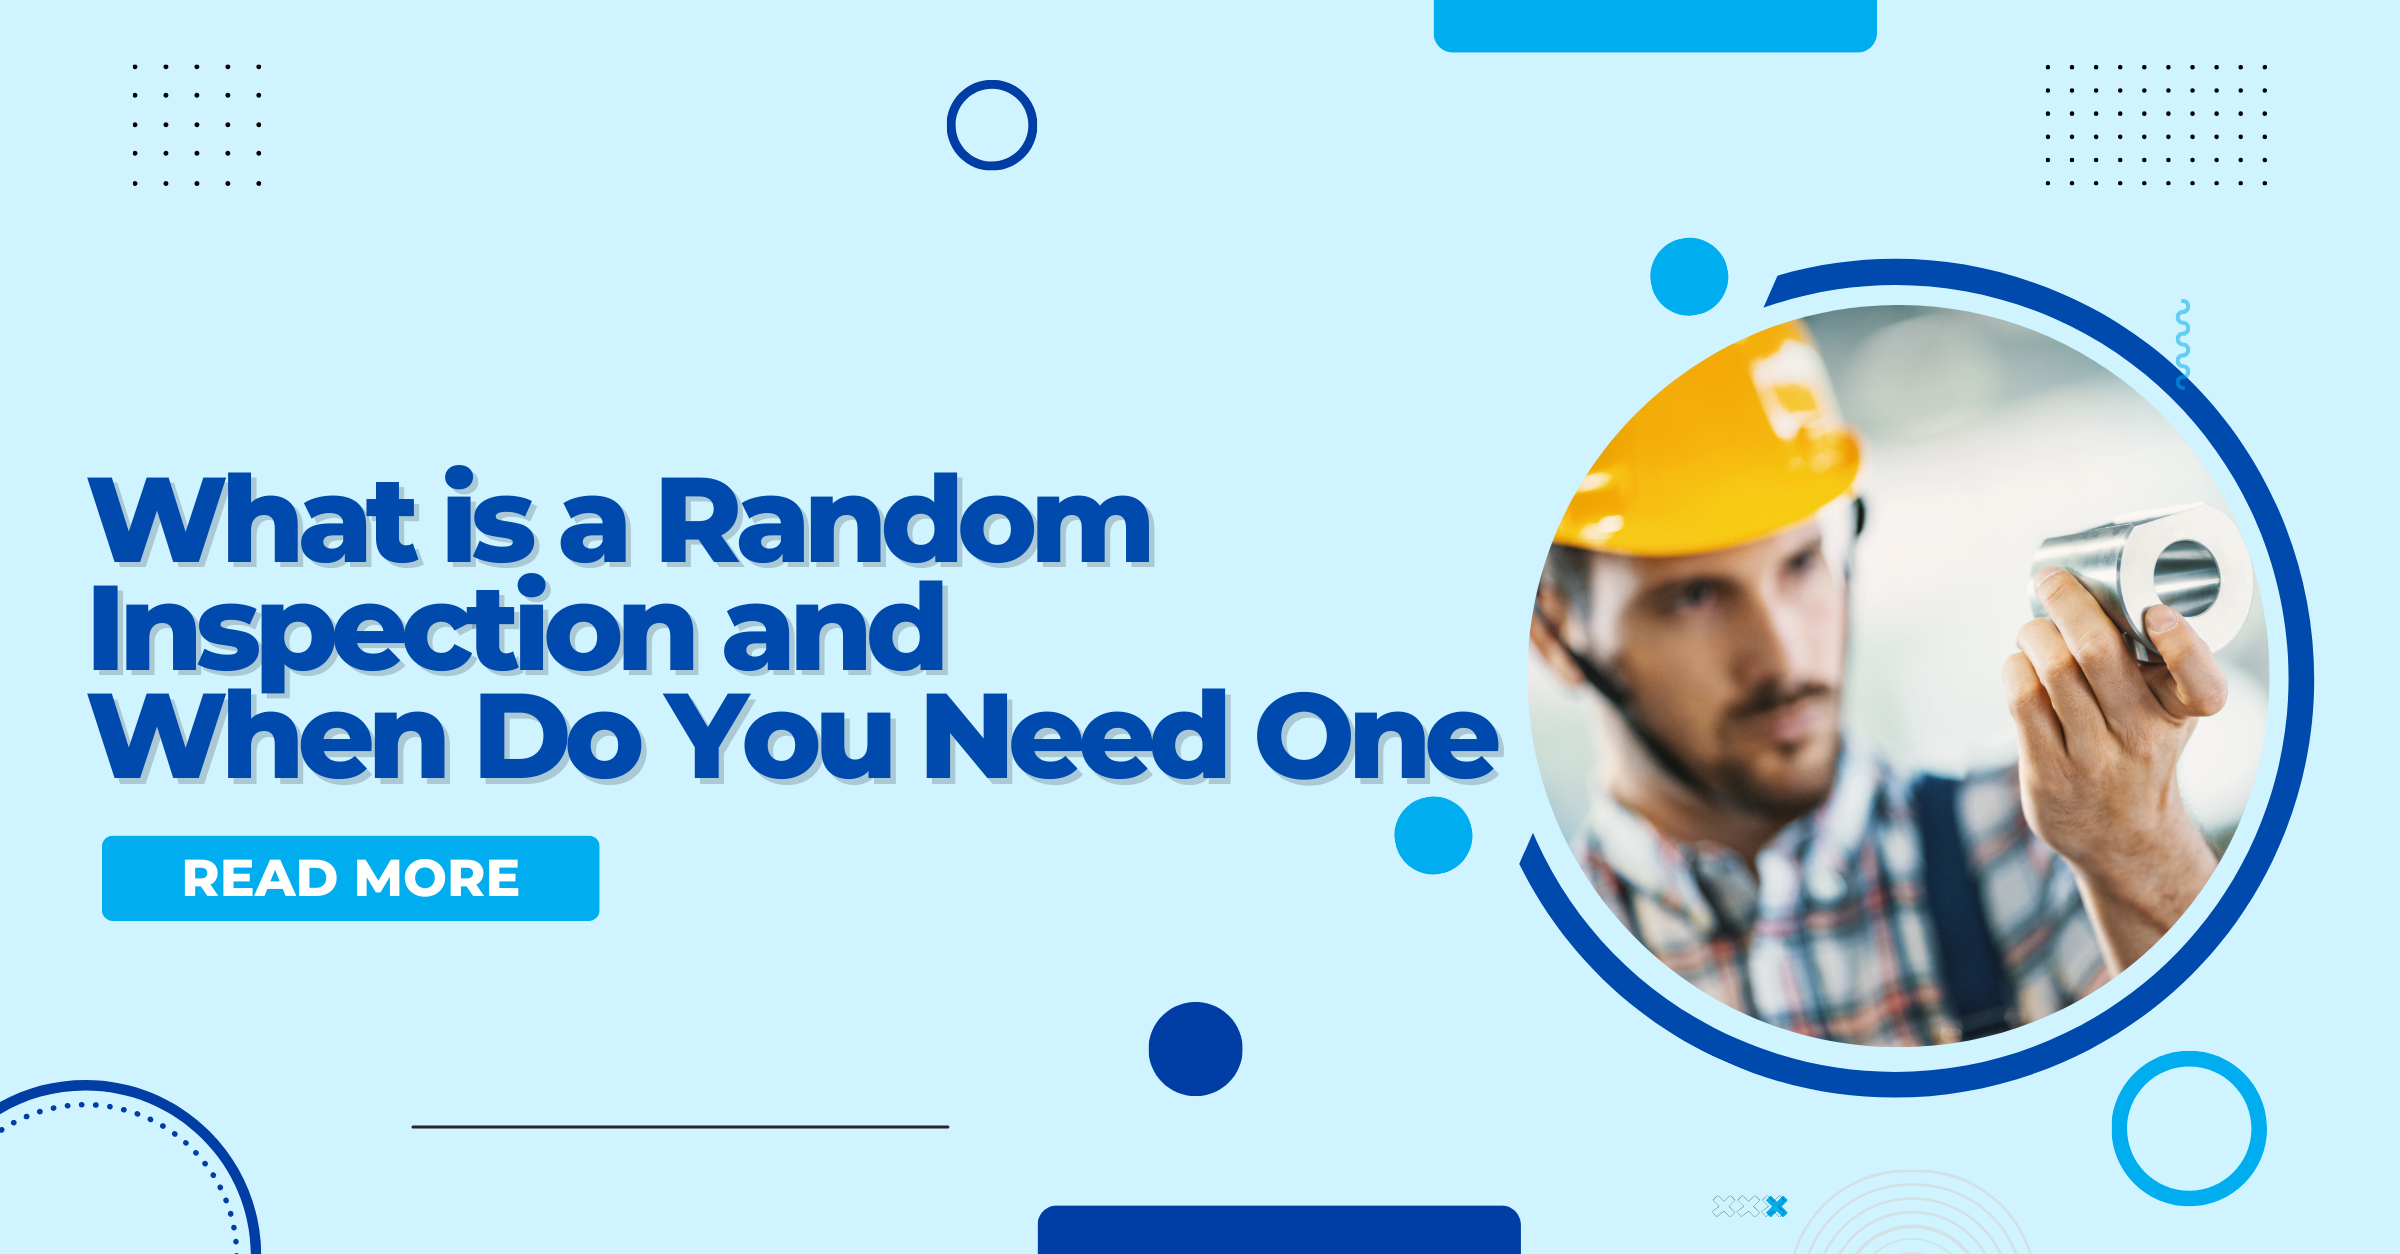 What is a Random Inspection and When Do You Need One